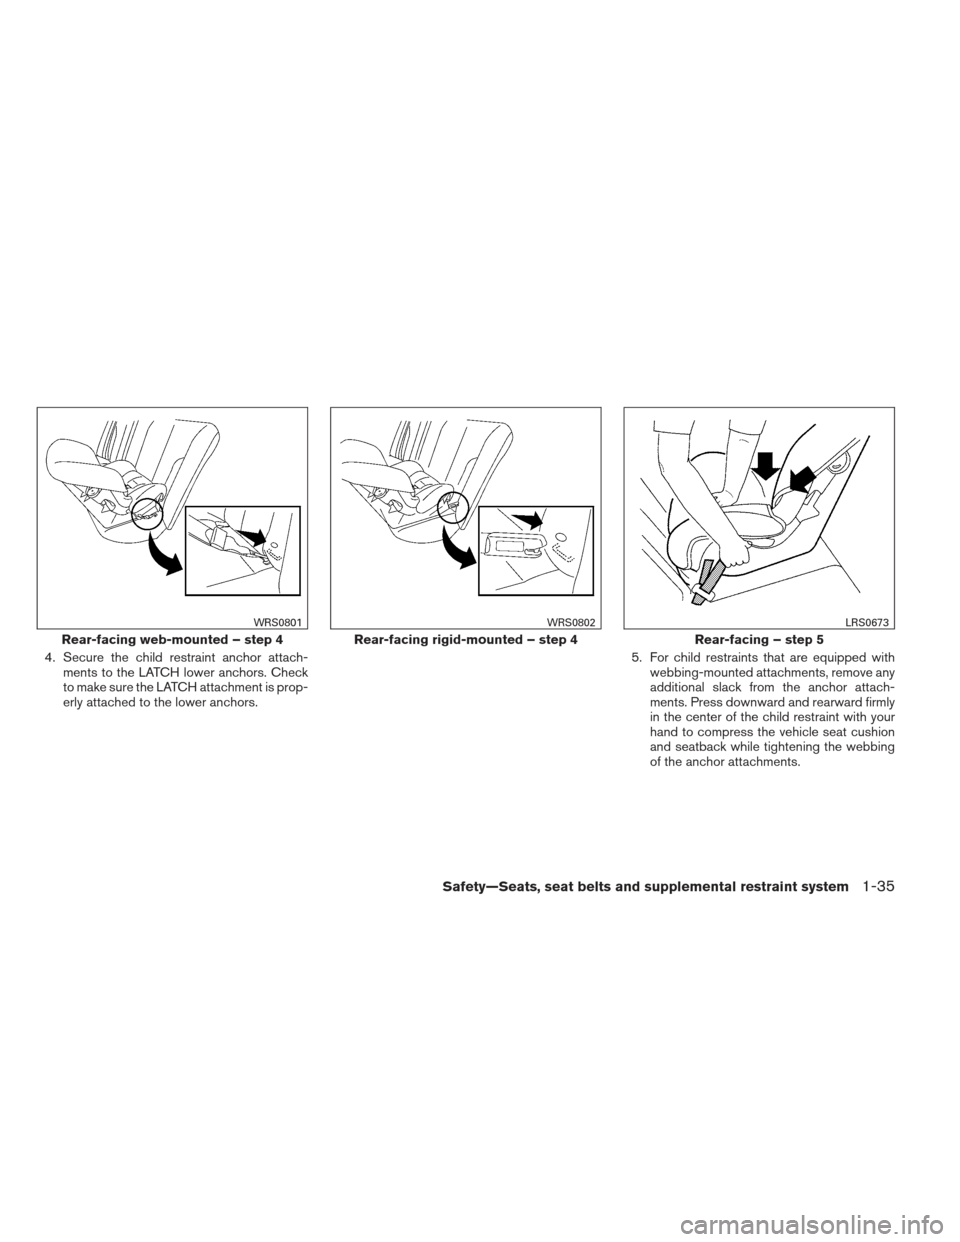 NISSAN FRONTIER 2013 D40 / 2.G Workshop Manual 4. Secure the child restraint anchor attach-ments to the LATCH lower anchors. Check
to make sure the LATCH attachment is prop-
erly attached to the lower anchors. 5. For child restraints that are equi